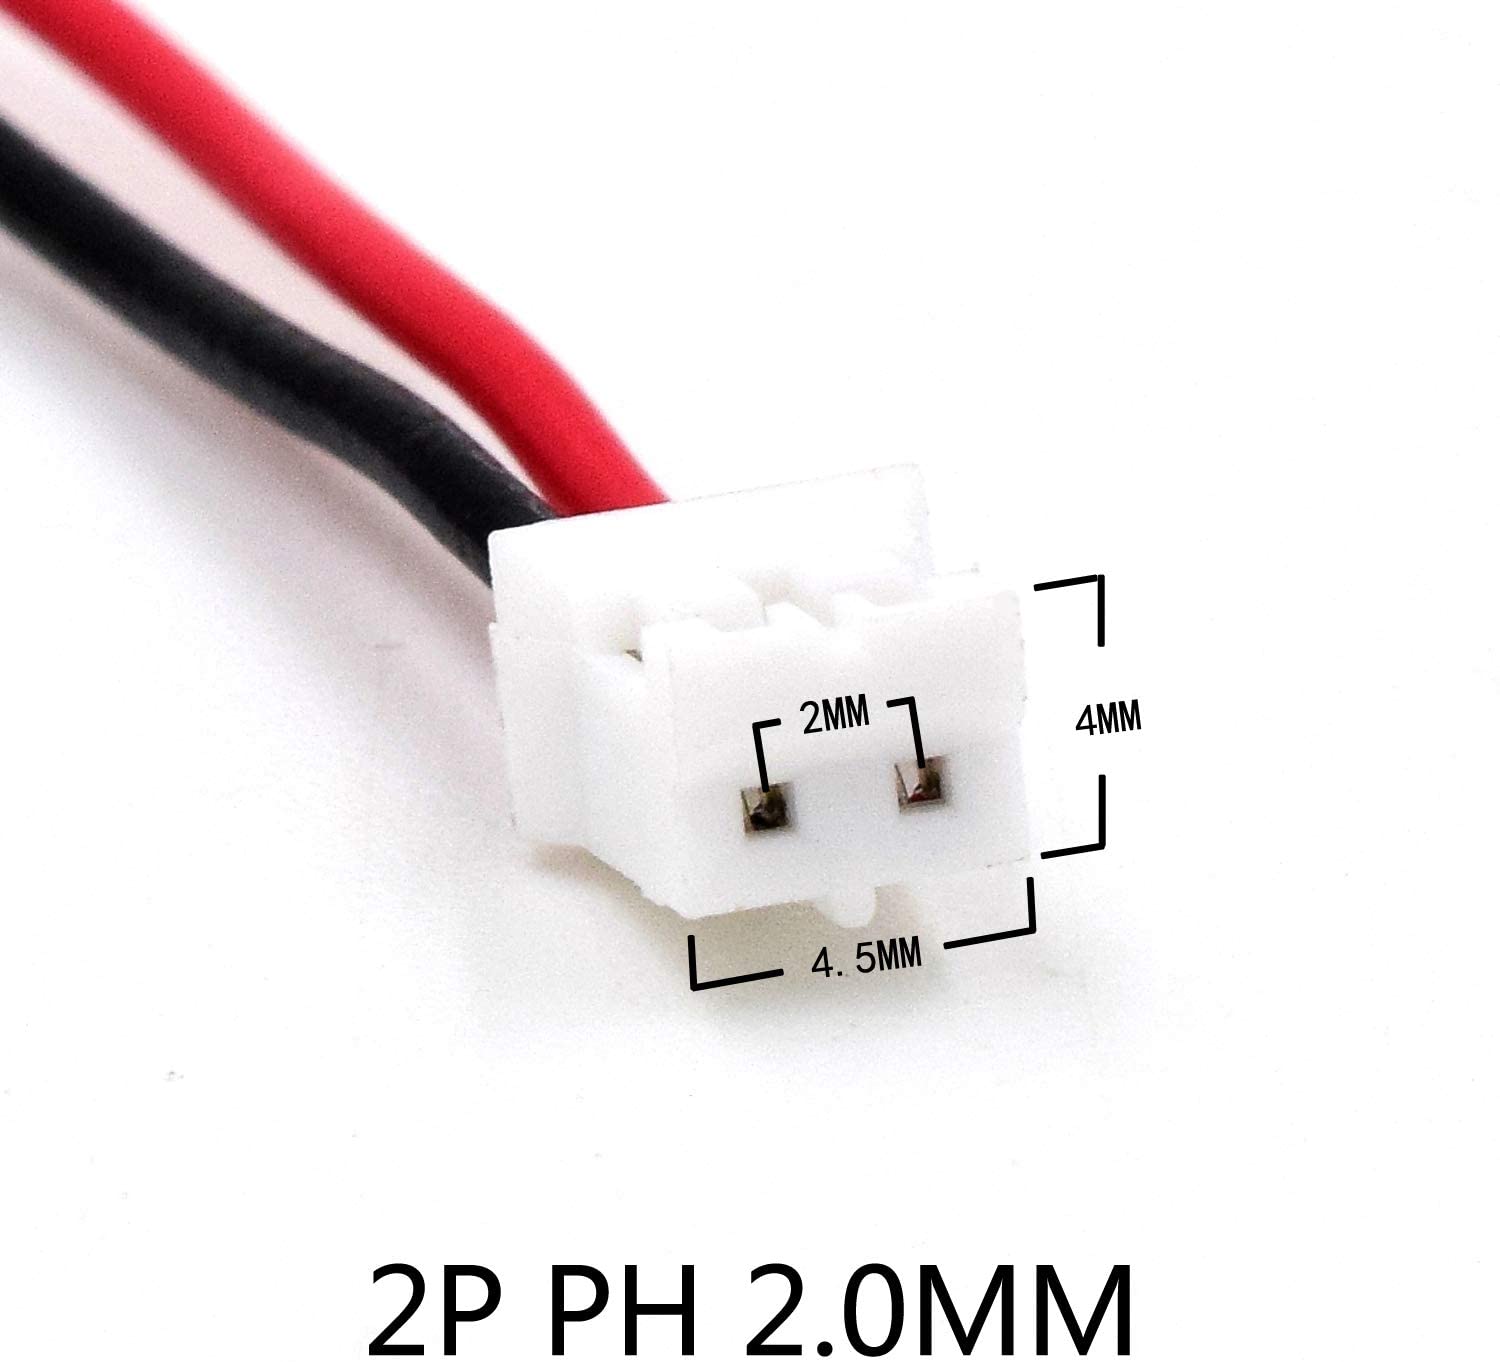 YDL 3.7V 3200mAh 605585 Rechargeable Polymer Lithium-Ion Battery Length 87mm